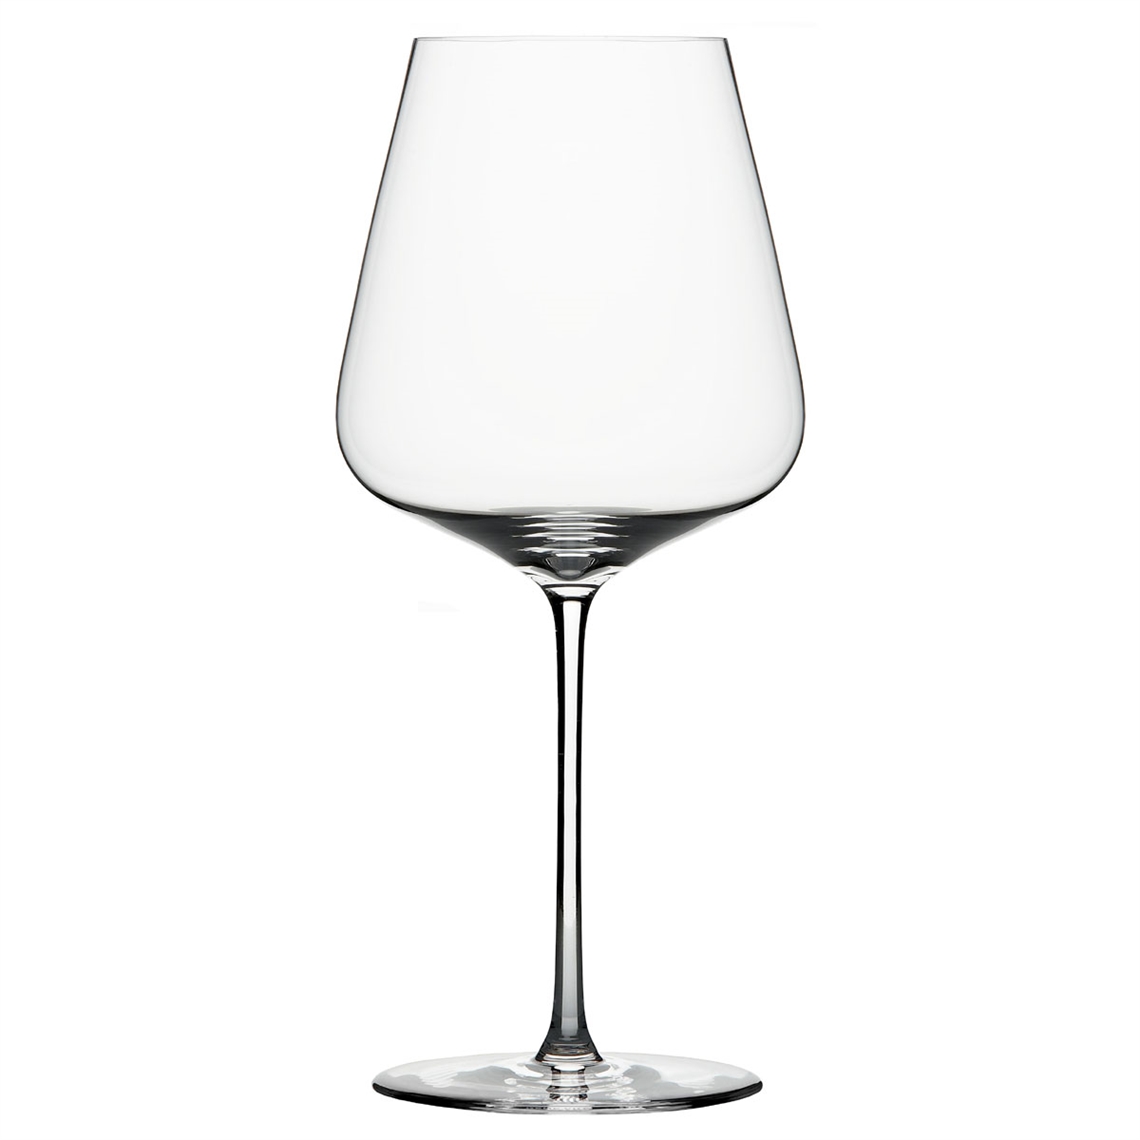 View more long drink & tumblers from our Premium Mouth Blown Glassware range